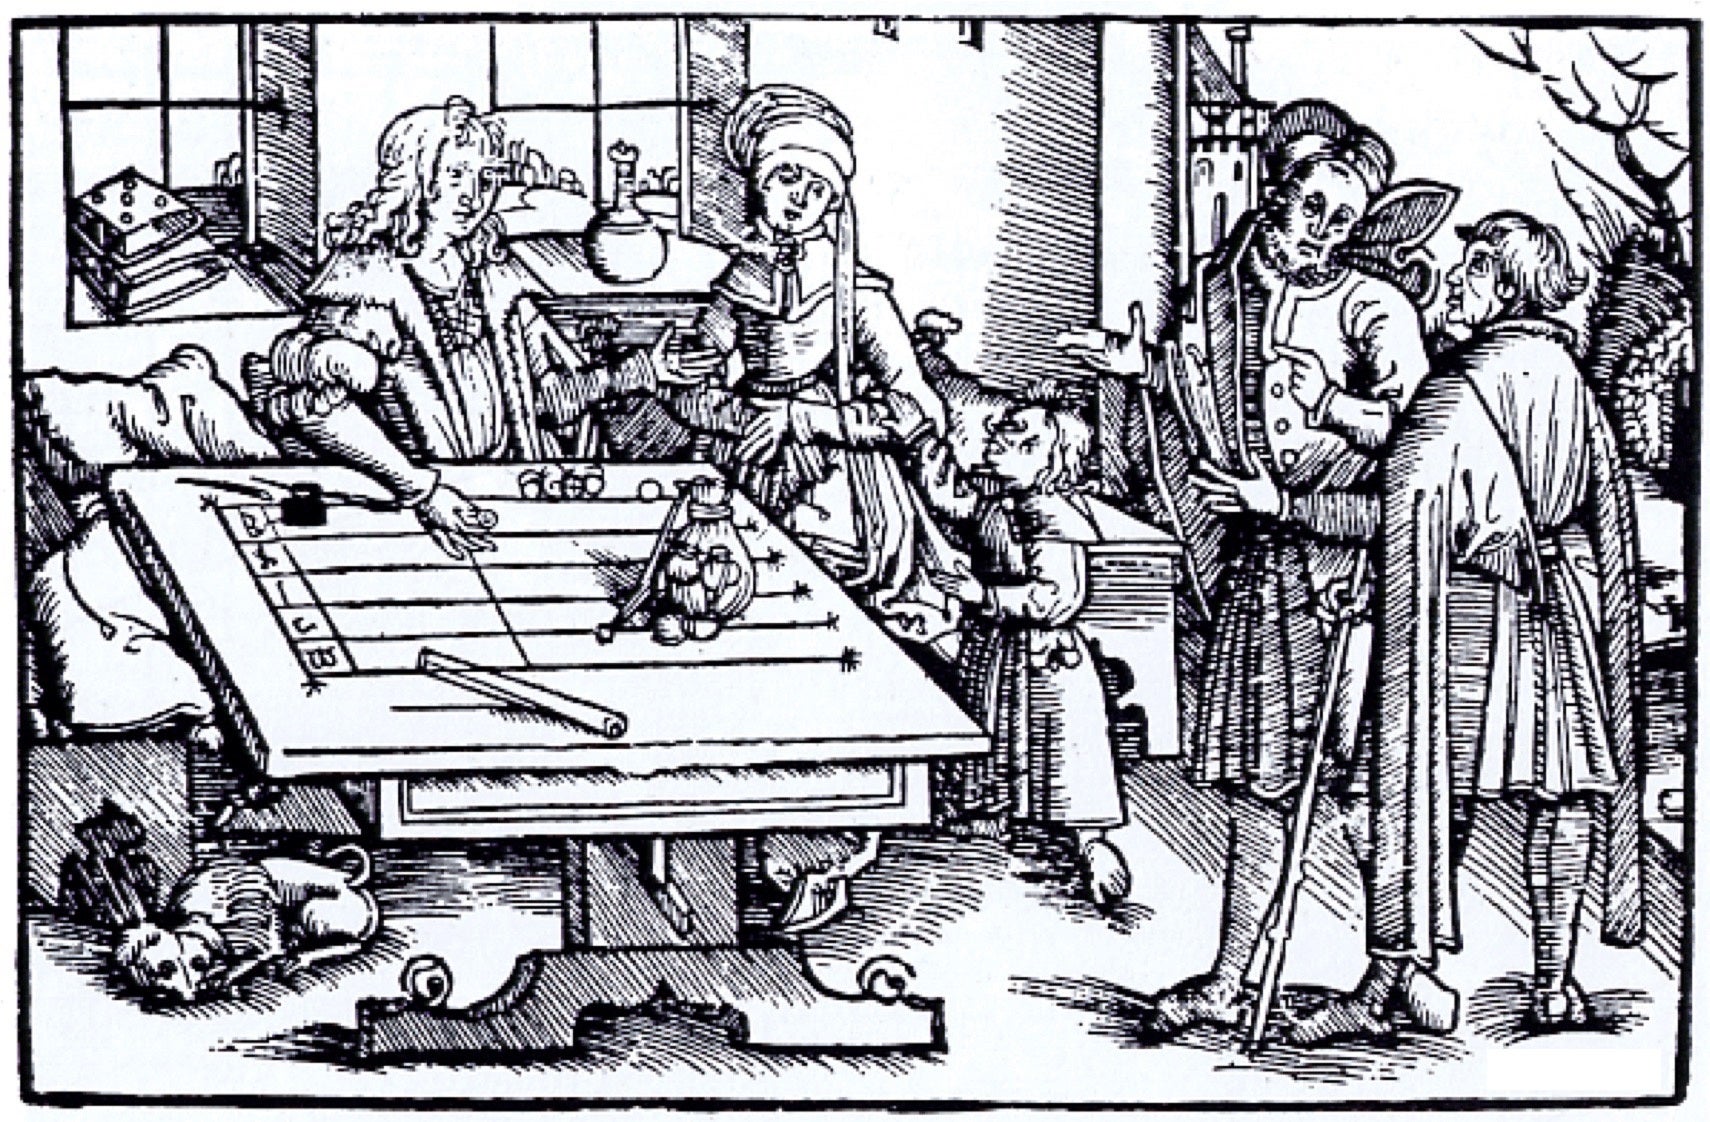 A Renaissance-era engraving of a counting board, or early abacus.